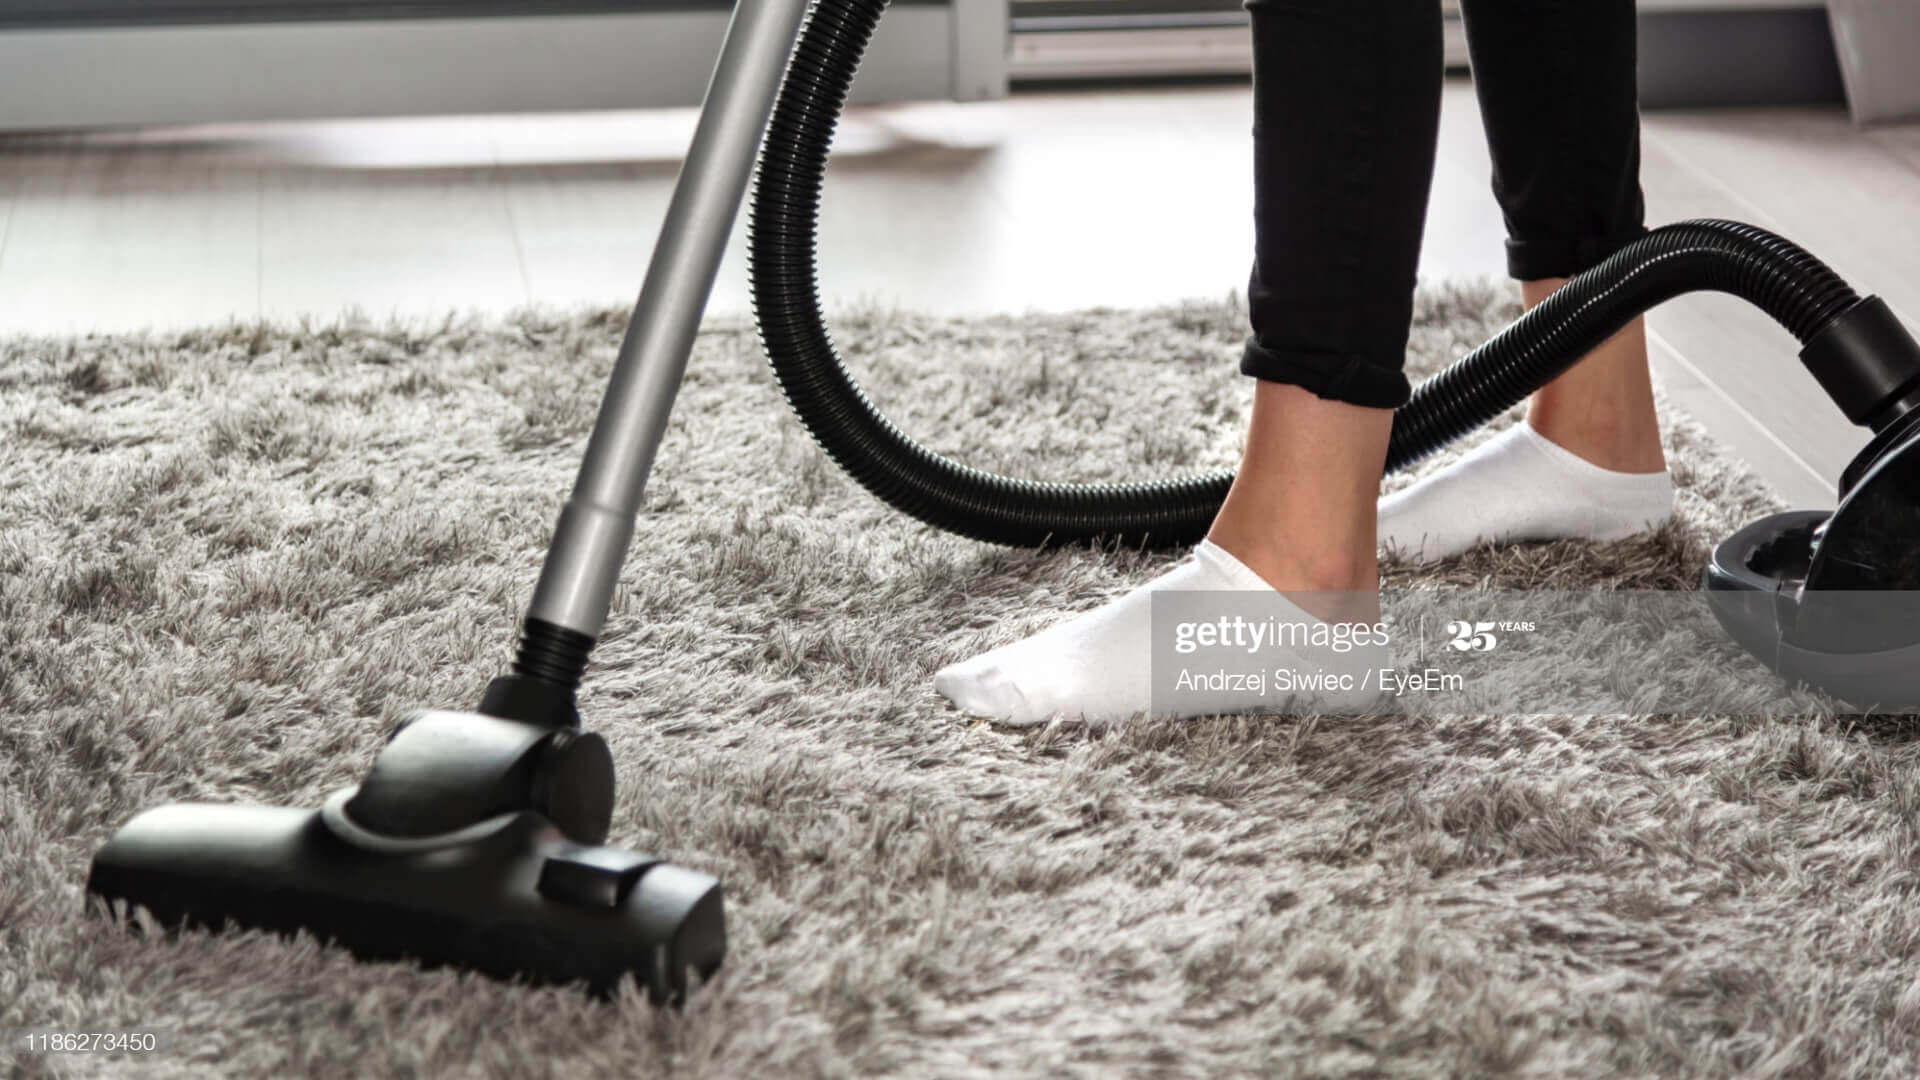 Gallery Epic4 Carpet And Vent Cleaning Services